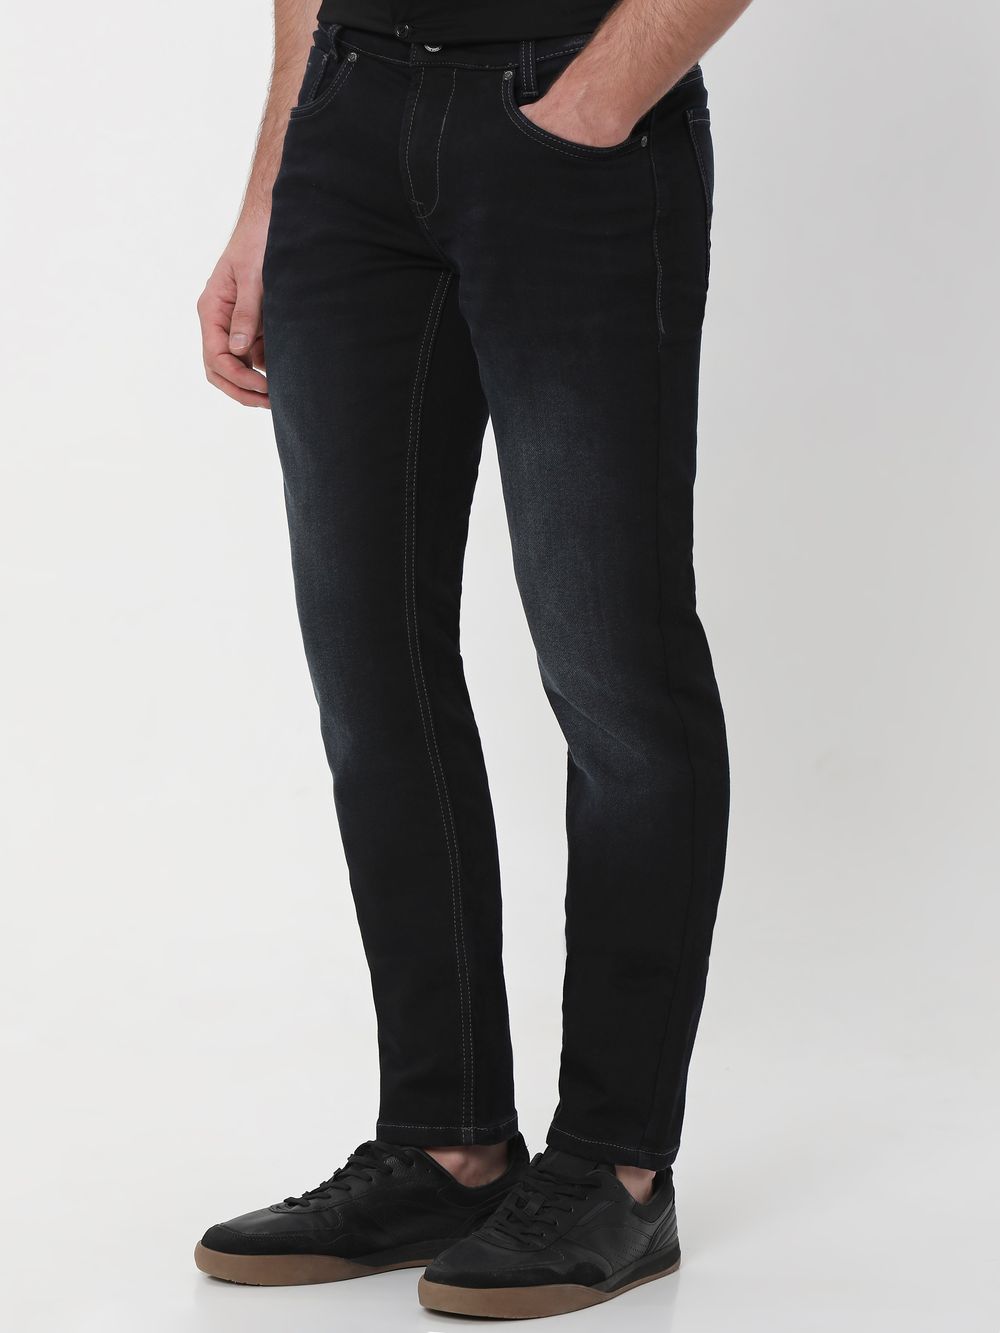 Black Narrow Fit Denim Deluxe Stretch Jeans